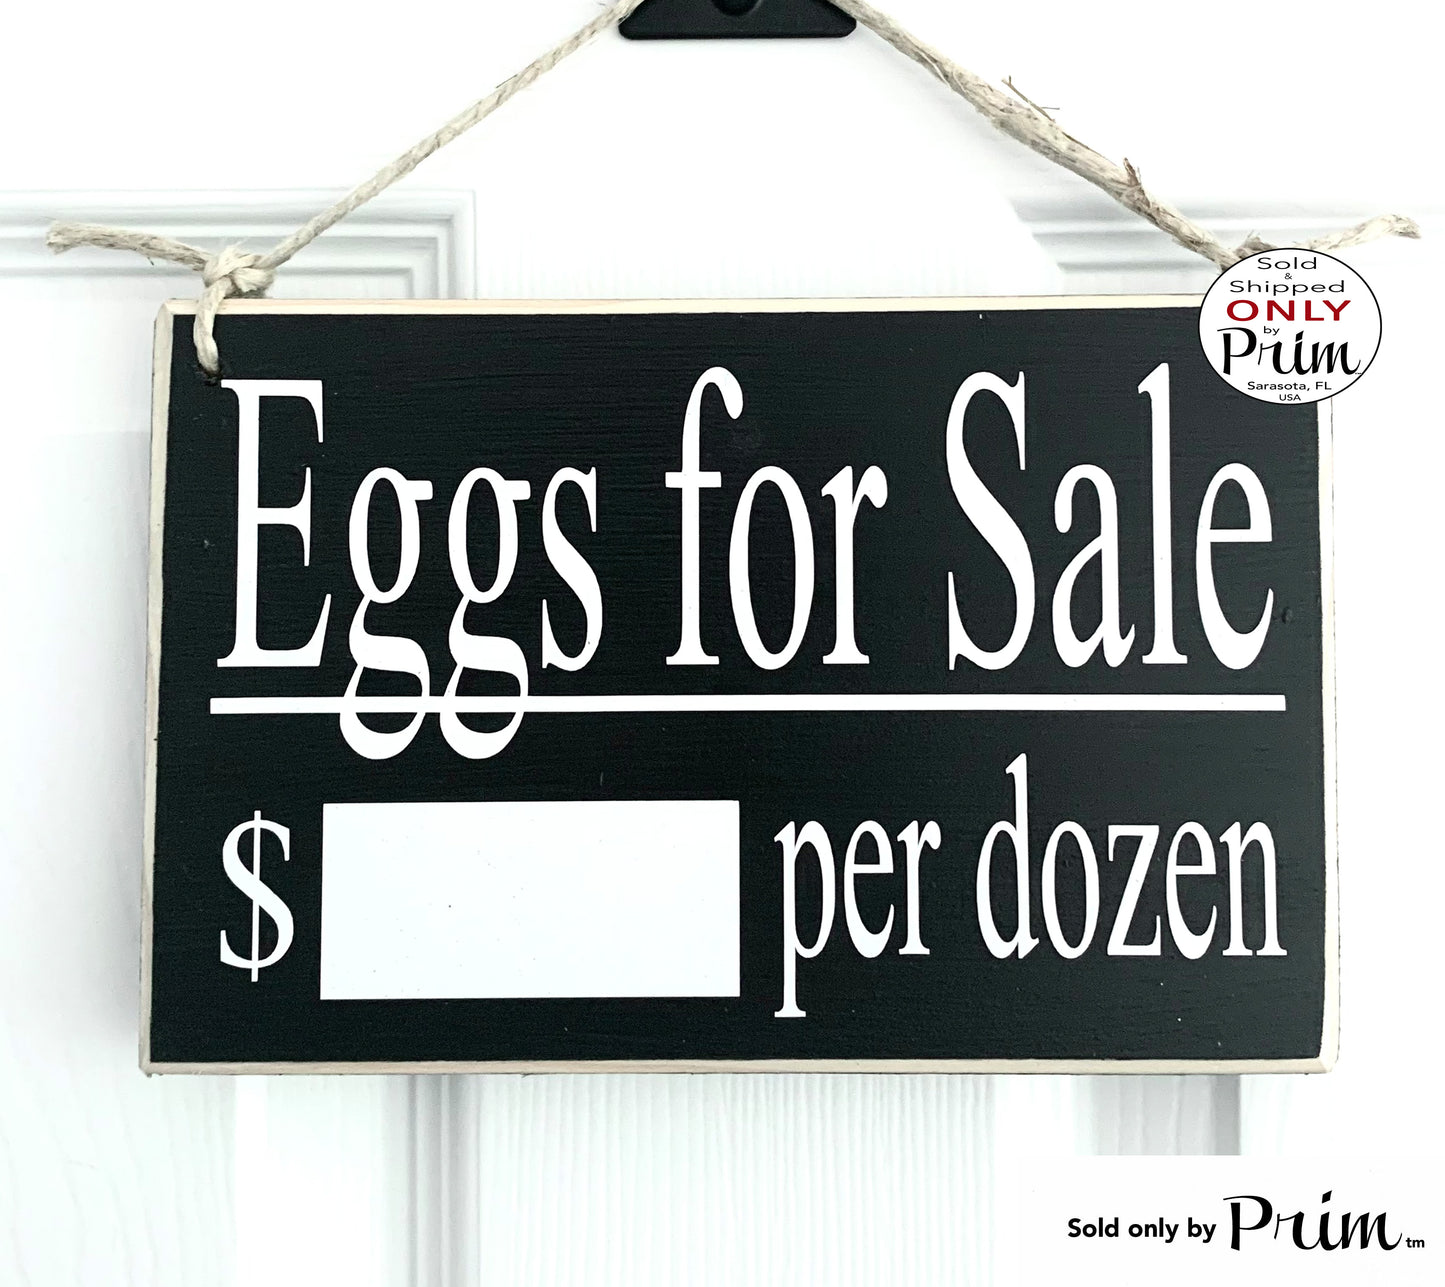 Designs by Prim 8x6 Eggs for Sale Per Dozen Custom Wood Sign | Sold Out Come Back Later Farmers market Farmhouse Chickens Local Grocery Door Plaque